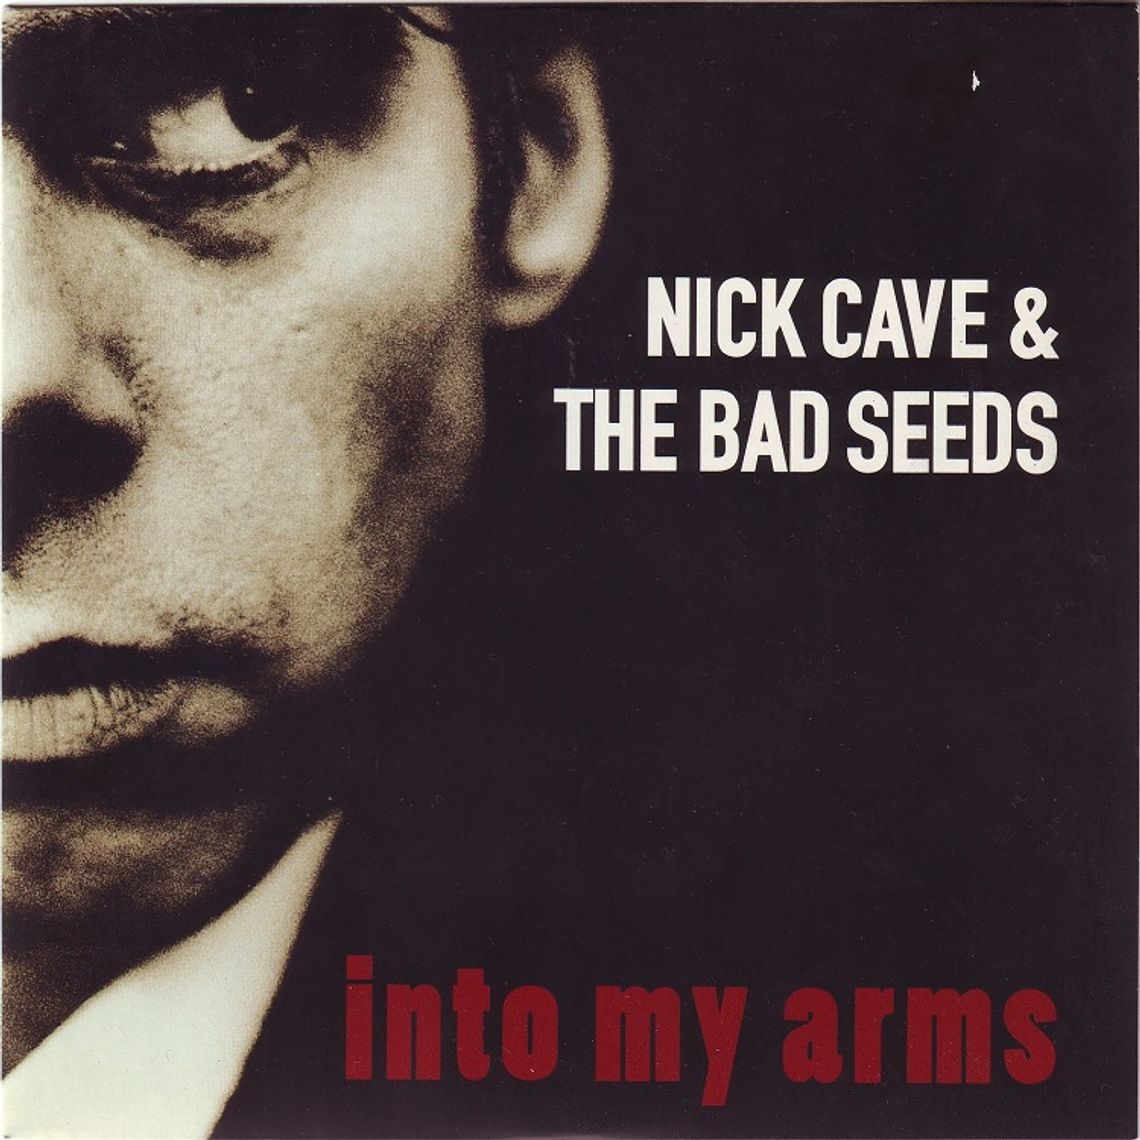 NICK CAVE "Into my arms"